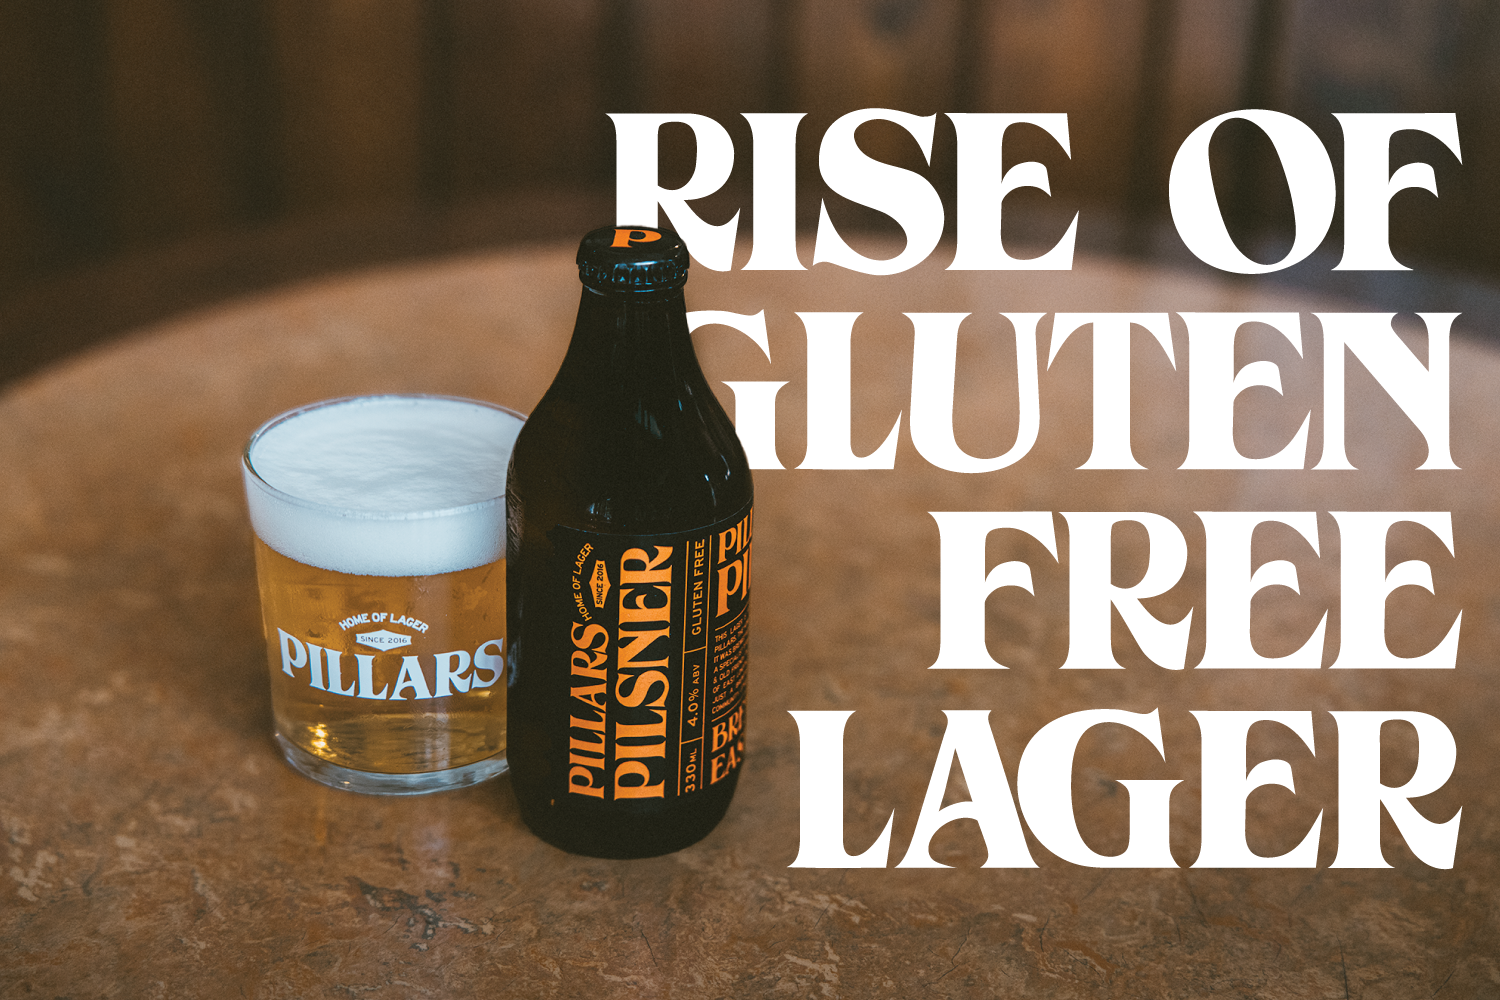 The Rise of Gluten-Free Lager